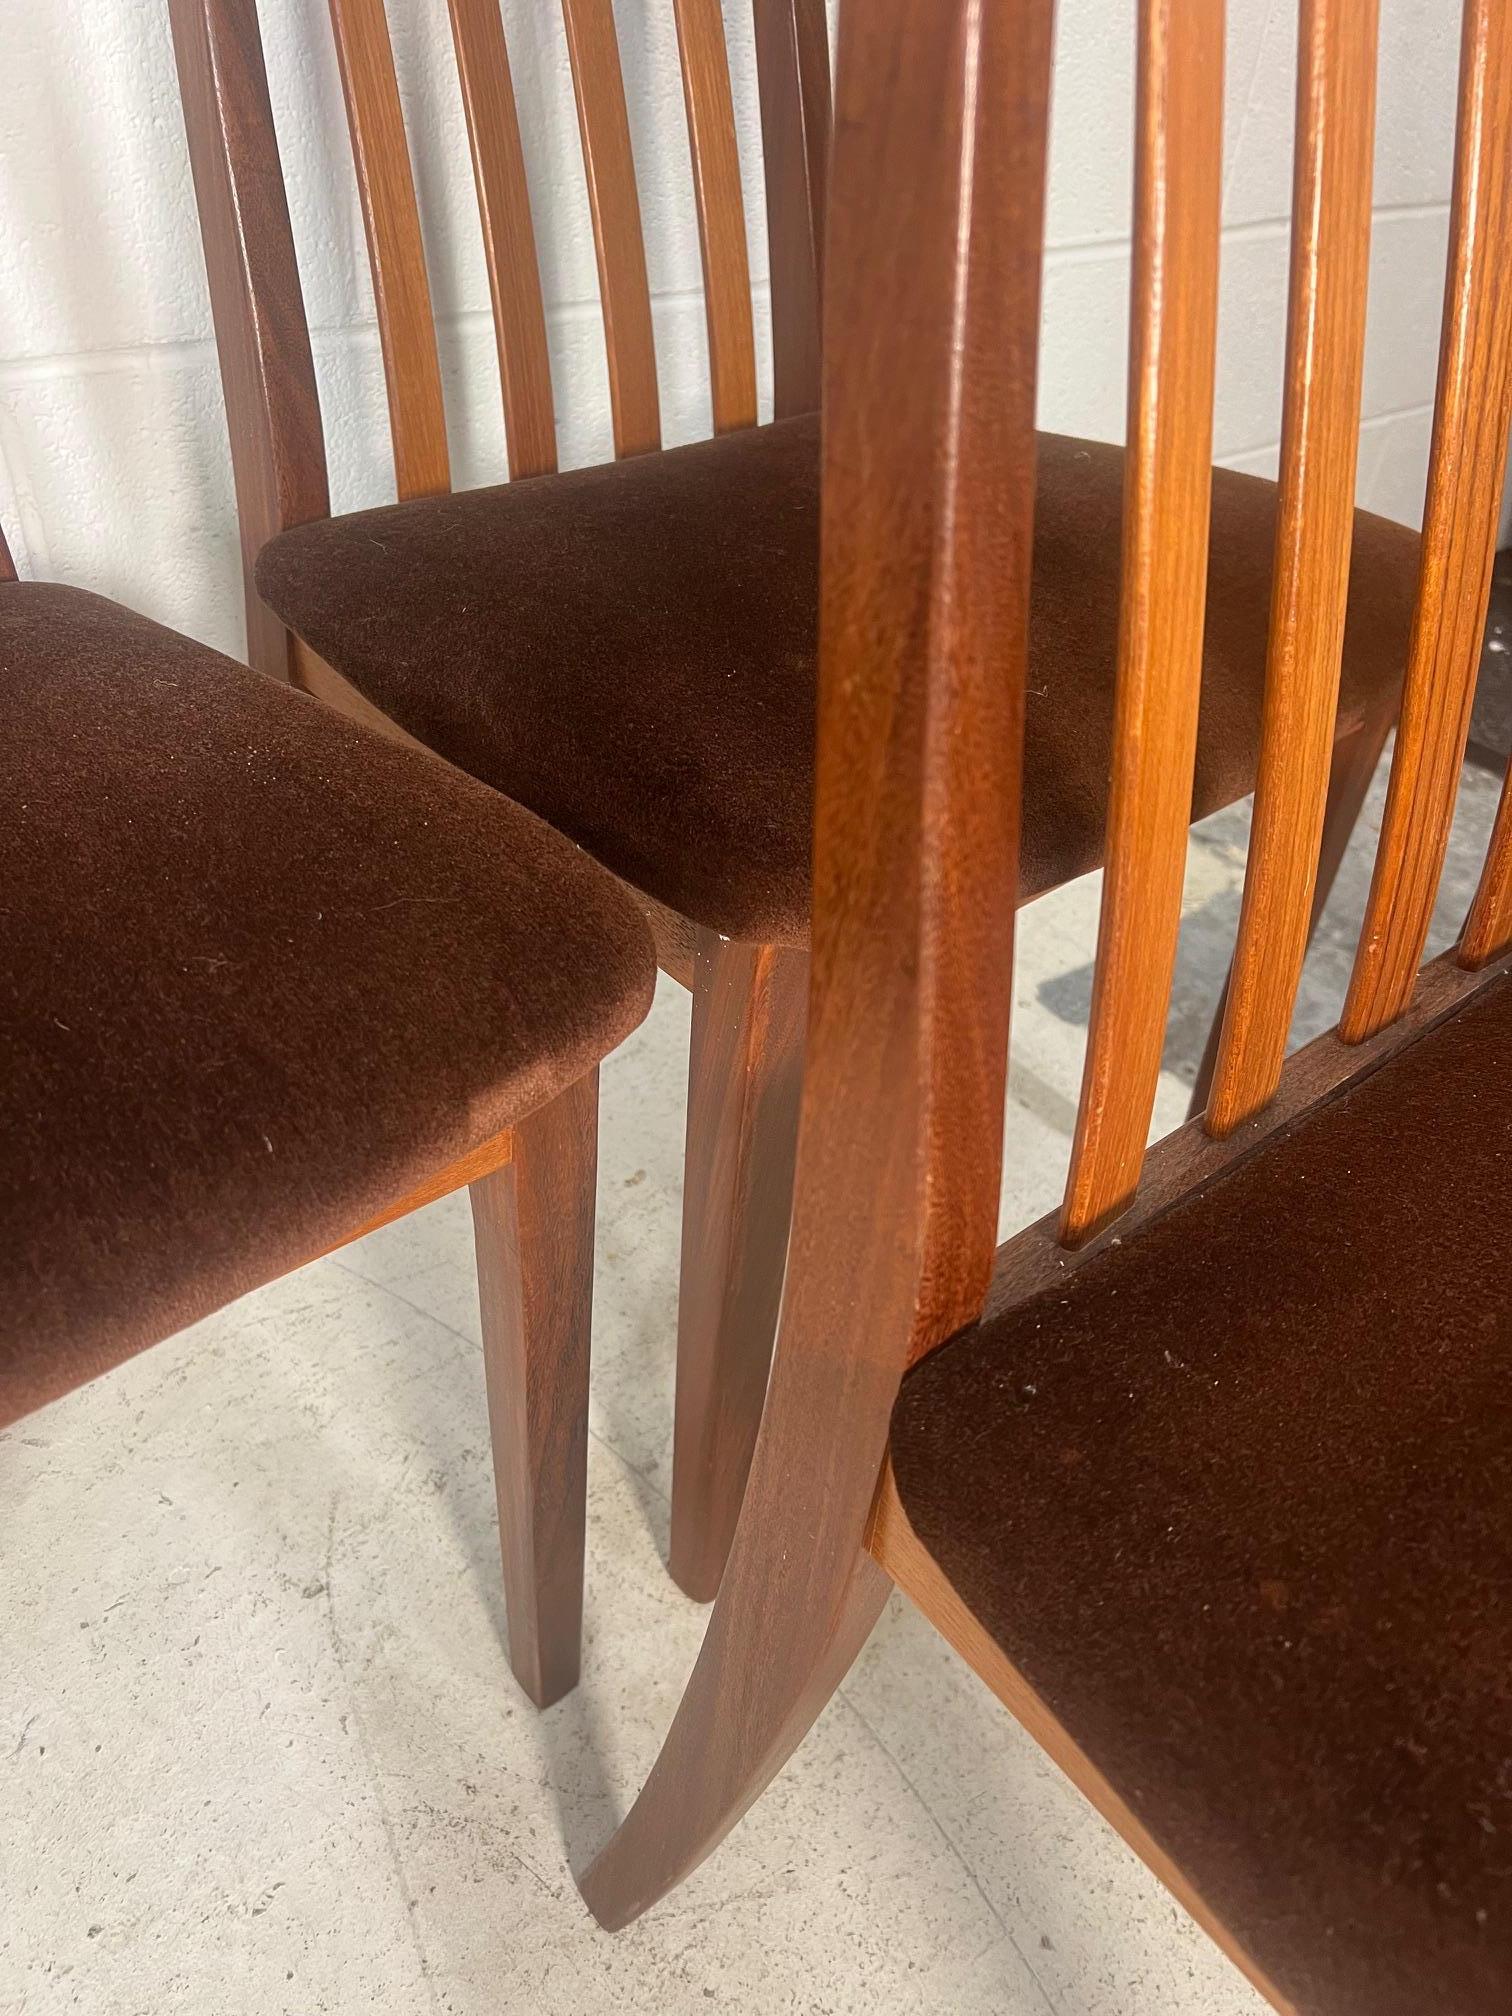 British Set Of 4 Mid Century Modern Teak Dining Chairs By G Plan For Sale